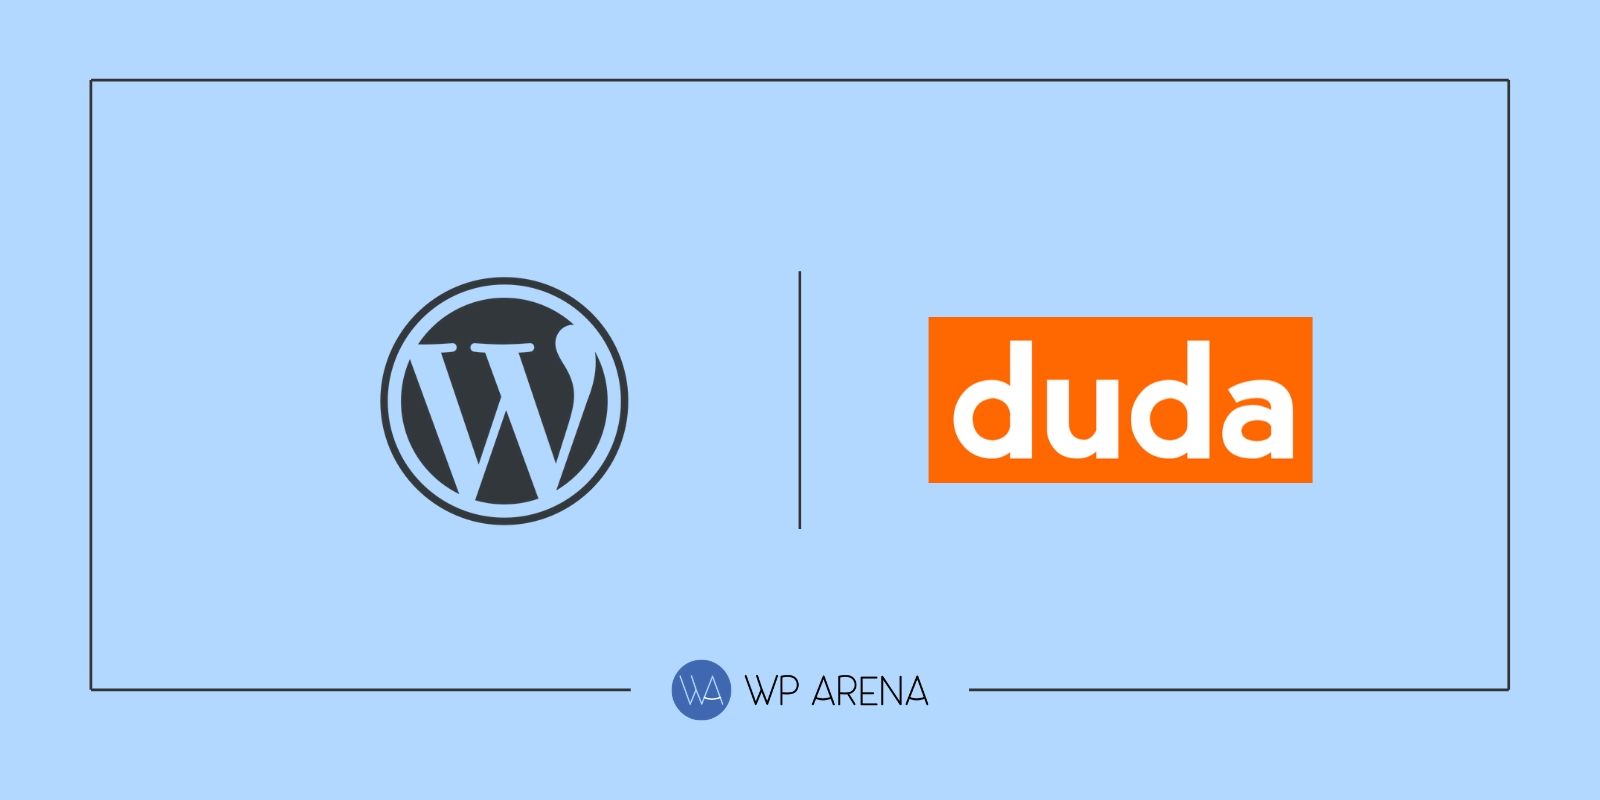 Duda vs WordPress: Which Is Better for Agencies Building Websites at Scale?